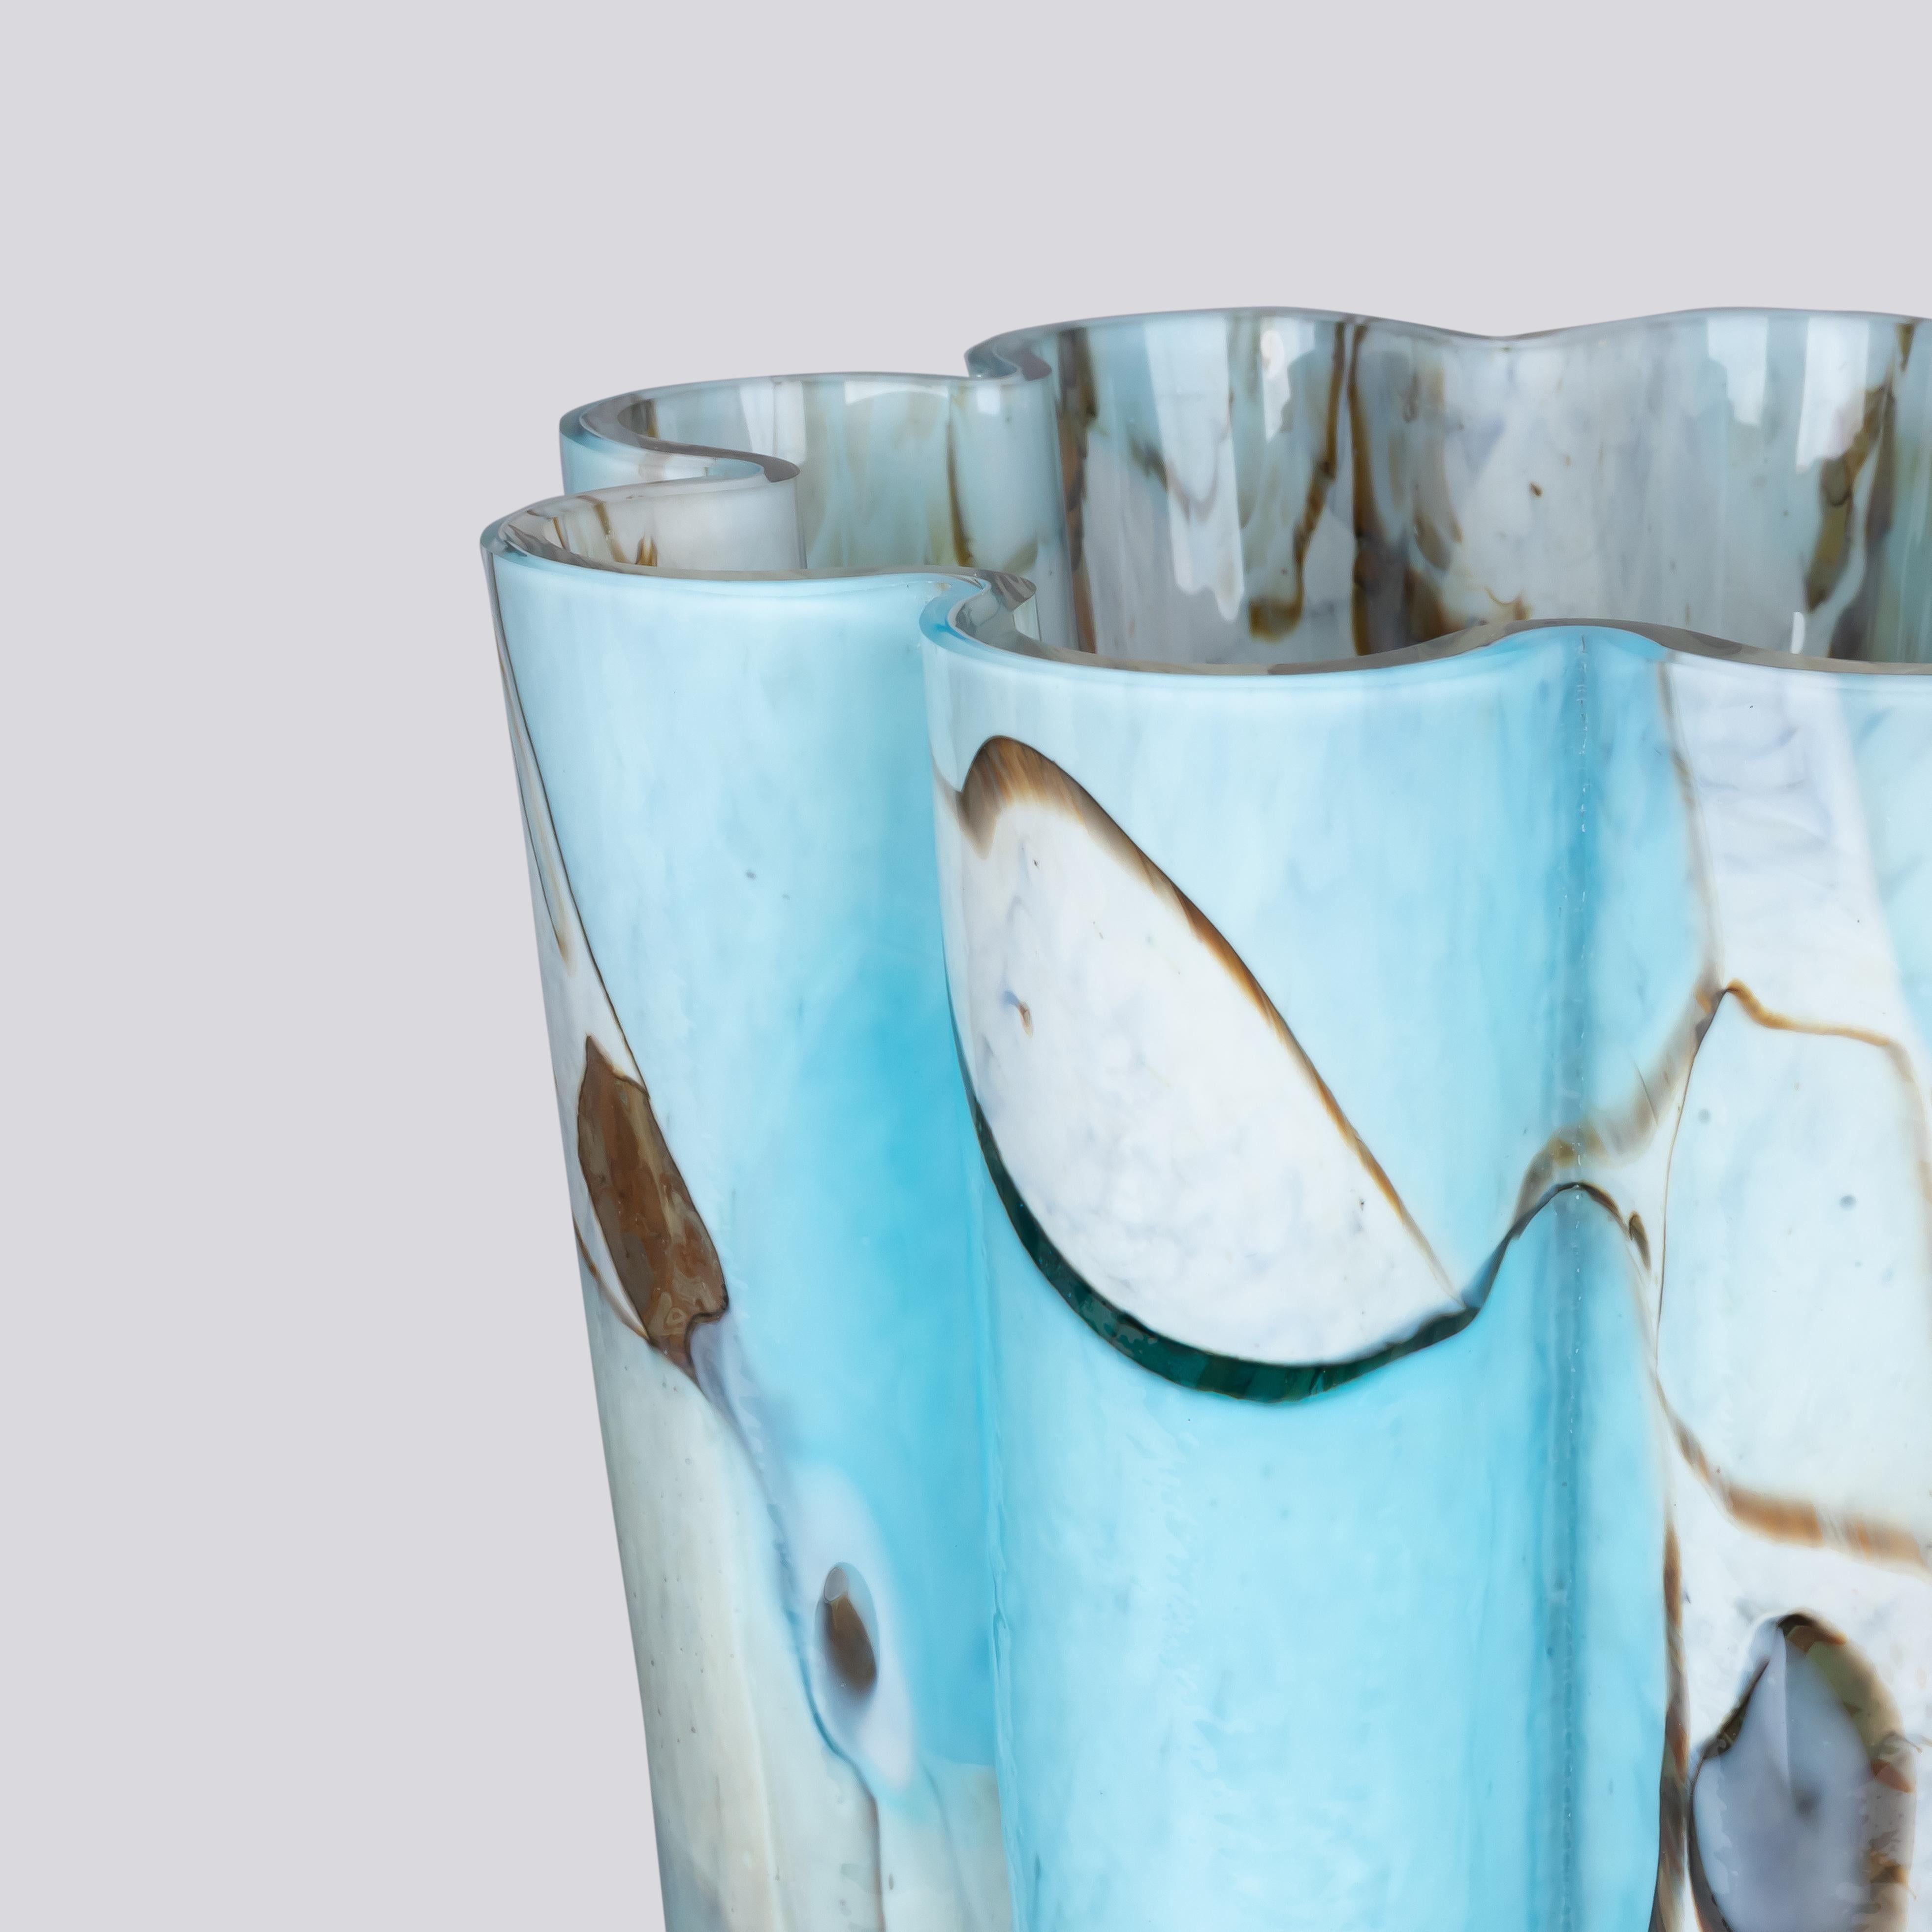 Crafted in the shape of a blooming flower, the Bucket vase features a captivating fusion of colors, with mesmerizing aquamarine shards of glass gracefully melted onto an ivory glass base. The result is a breathtaking display of serene blue hues,